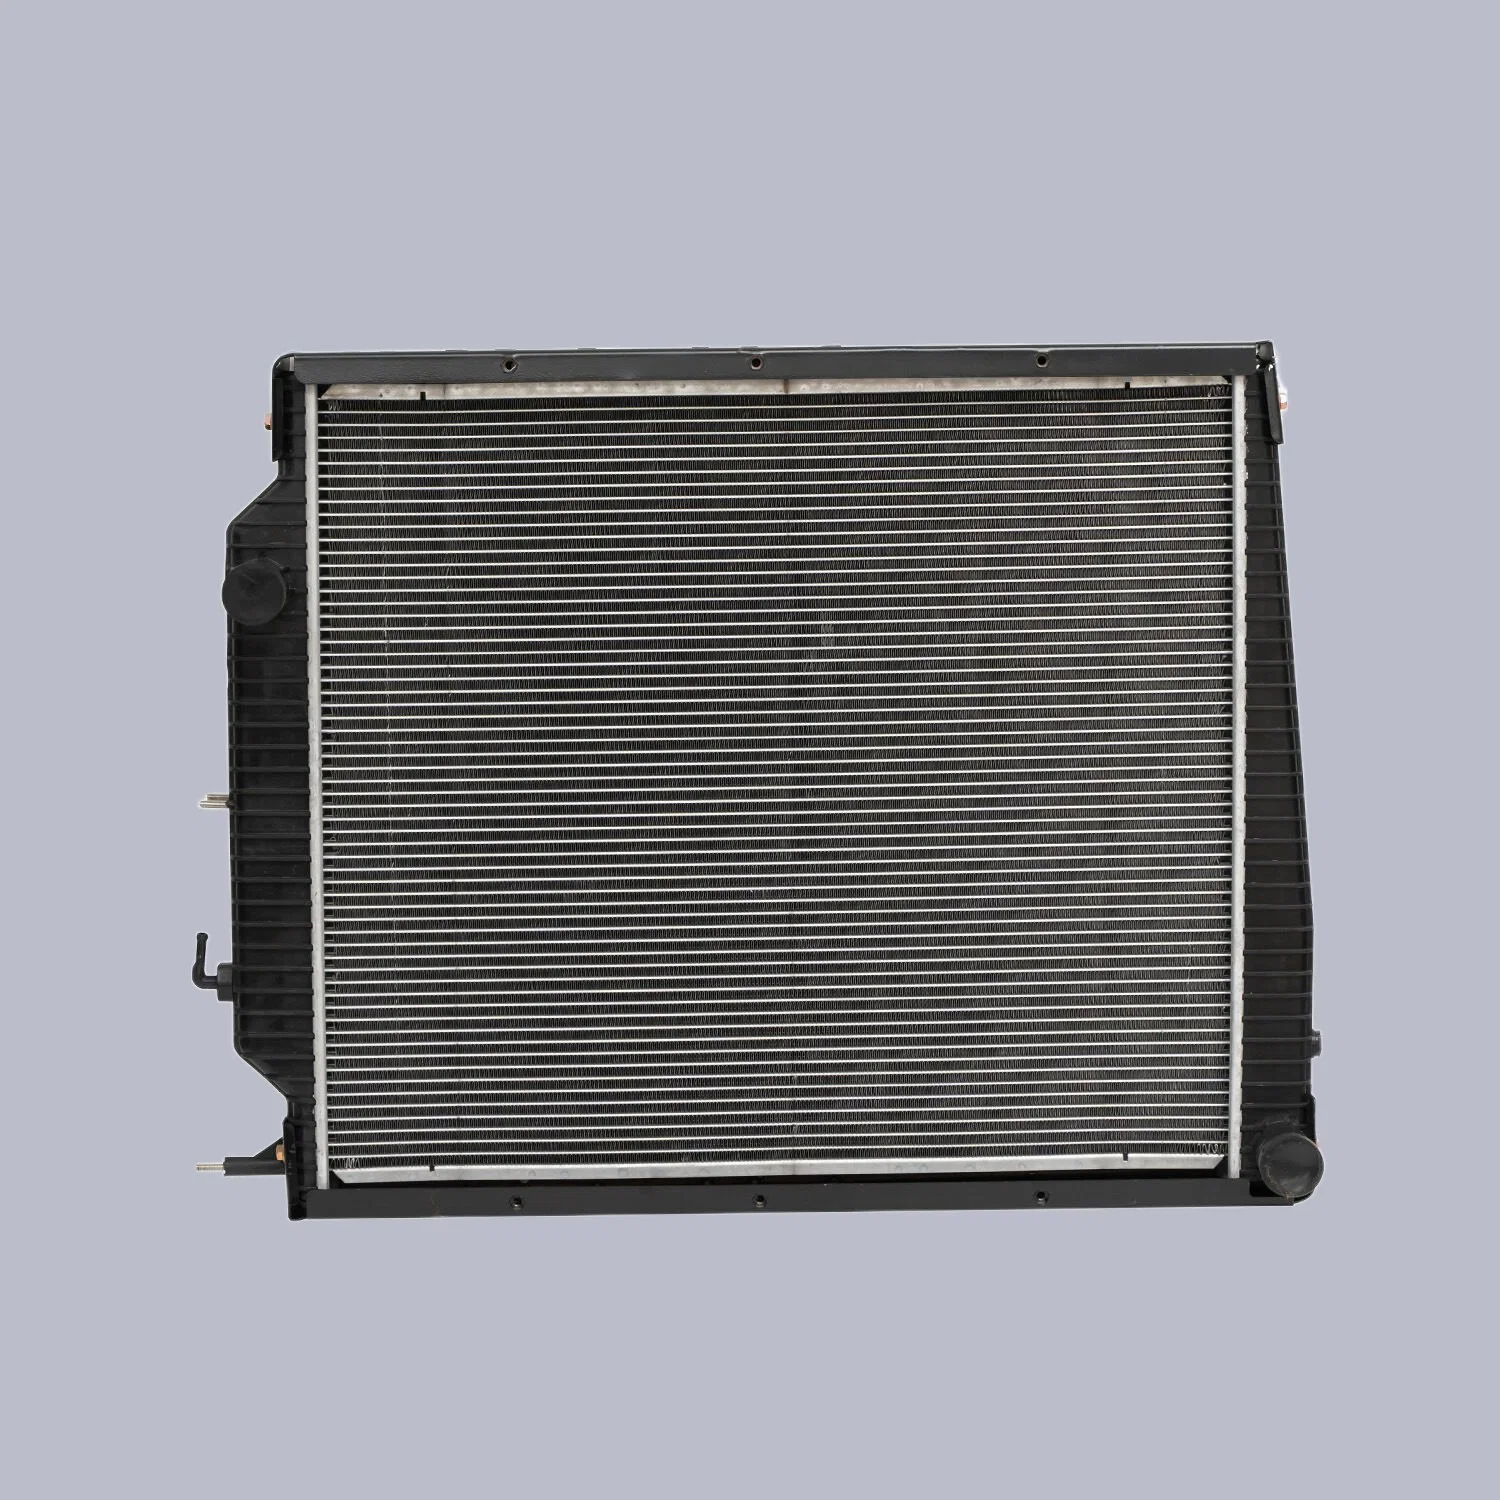 Radiator for Truck Freightliner Century Columbia with Manual Dz9112532888 Dz9112539268